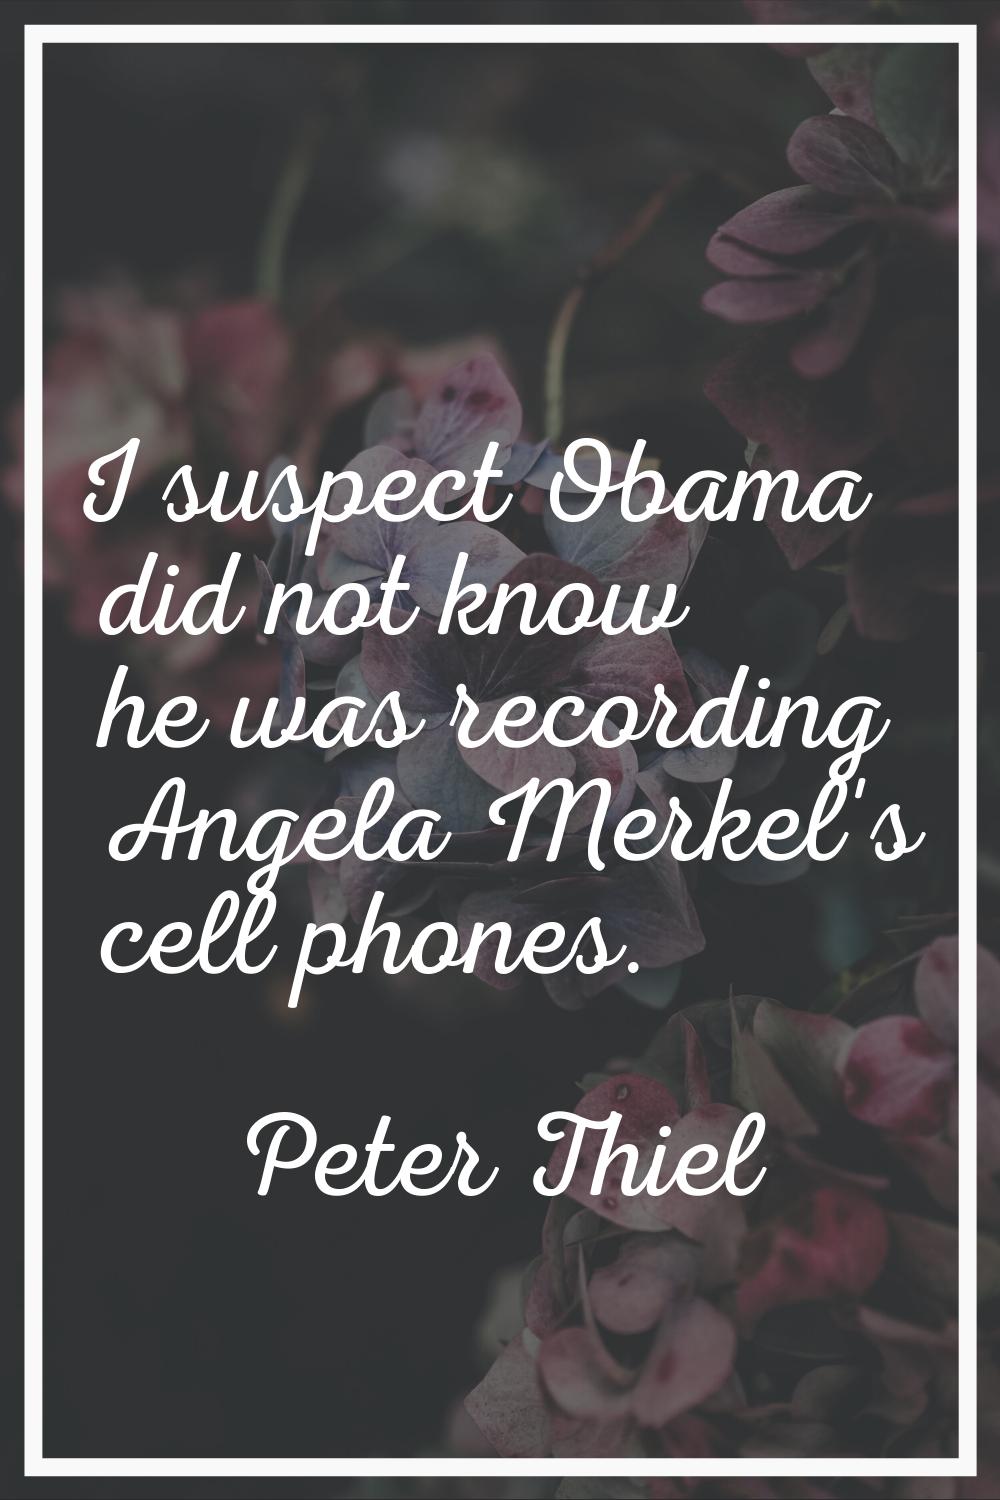 I suspect Obama did not know he was recording Angela Merkel's cell phones.